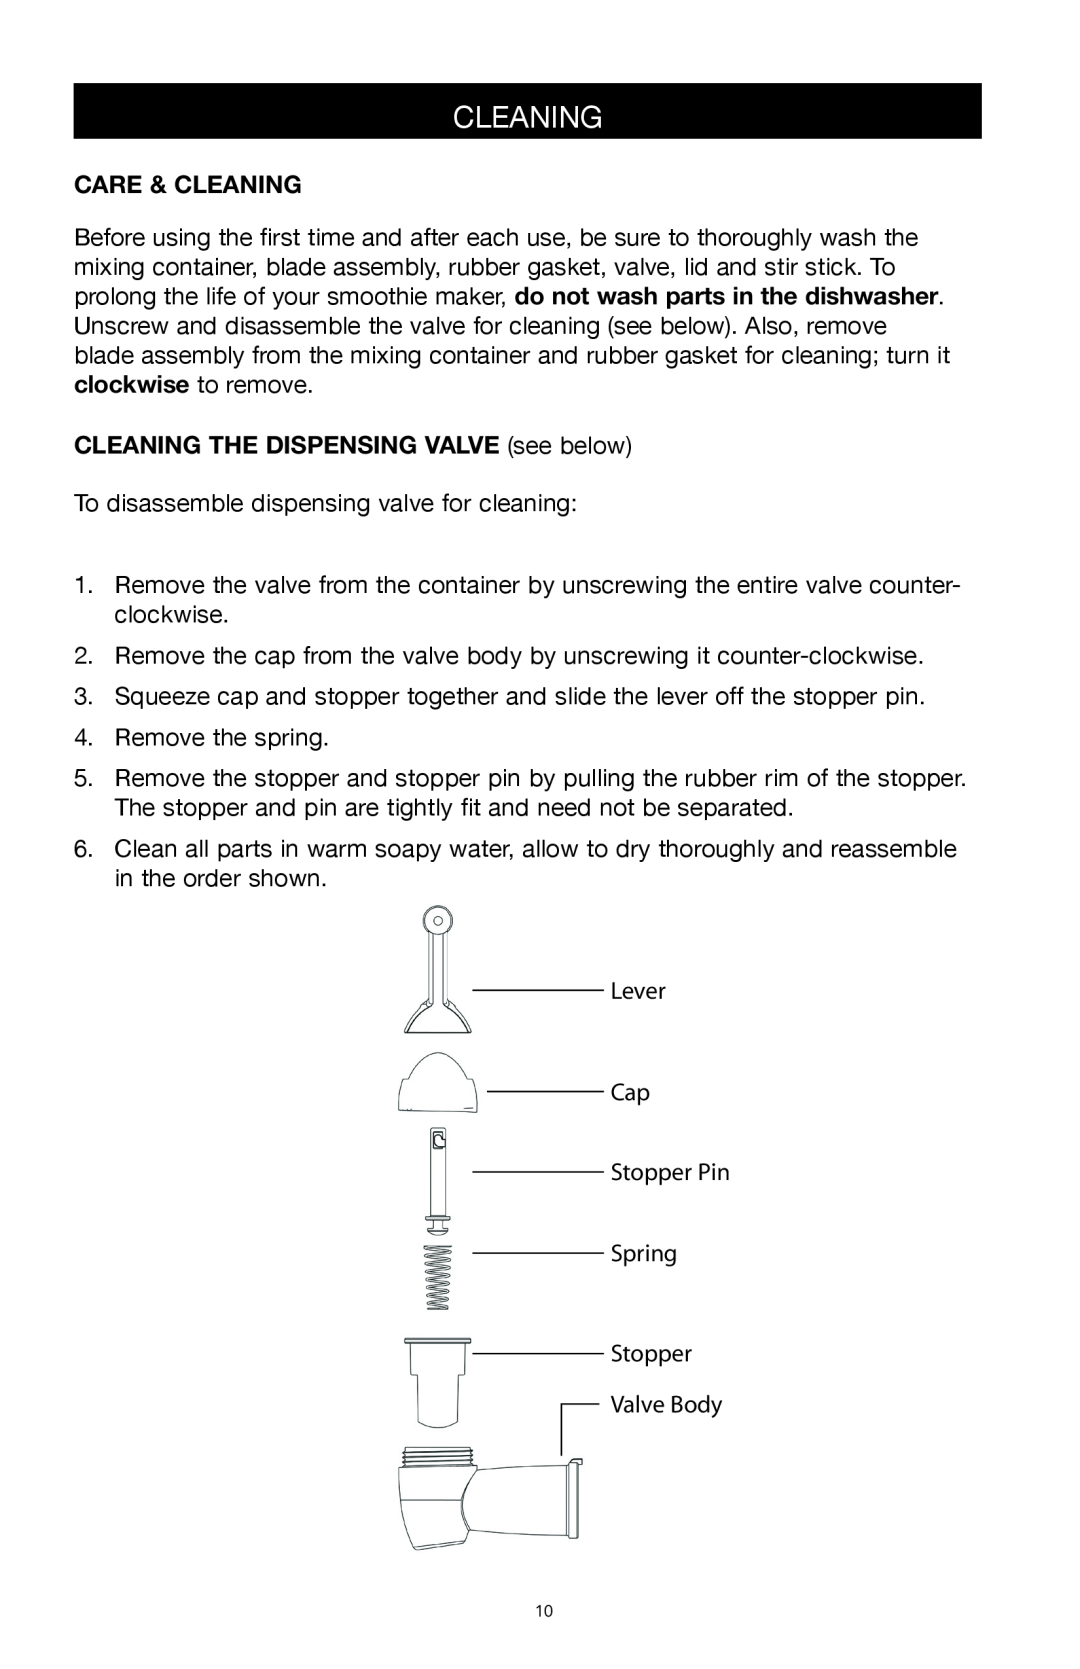 West Bend Back to Basics SCL5 manual Care & Cleaning, CLEANING THE DISPENSING VALVE see below 